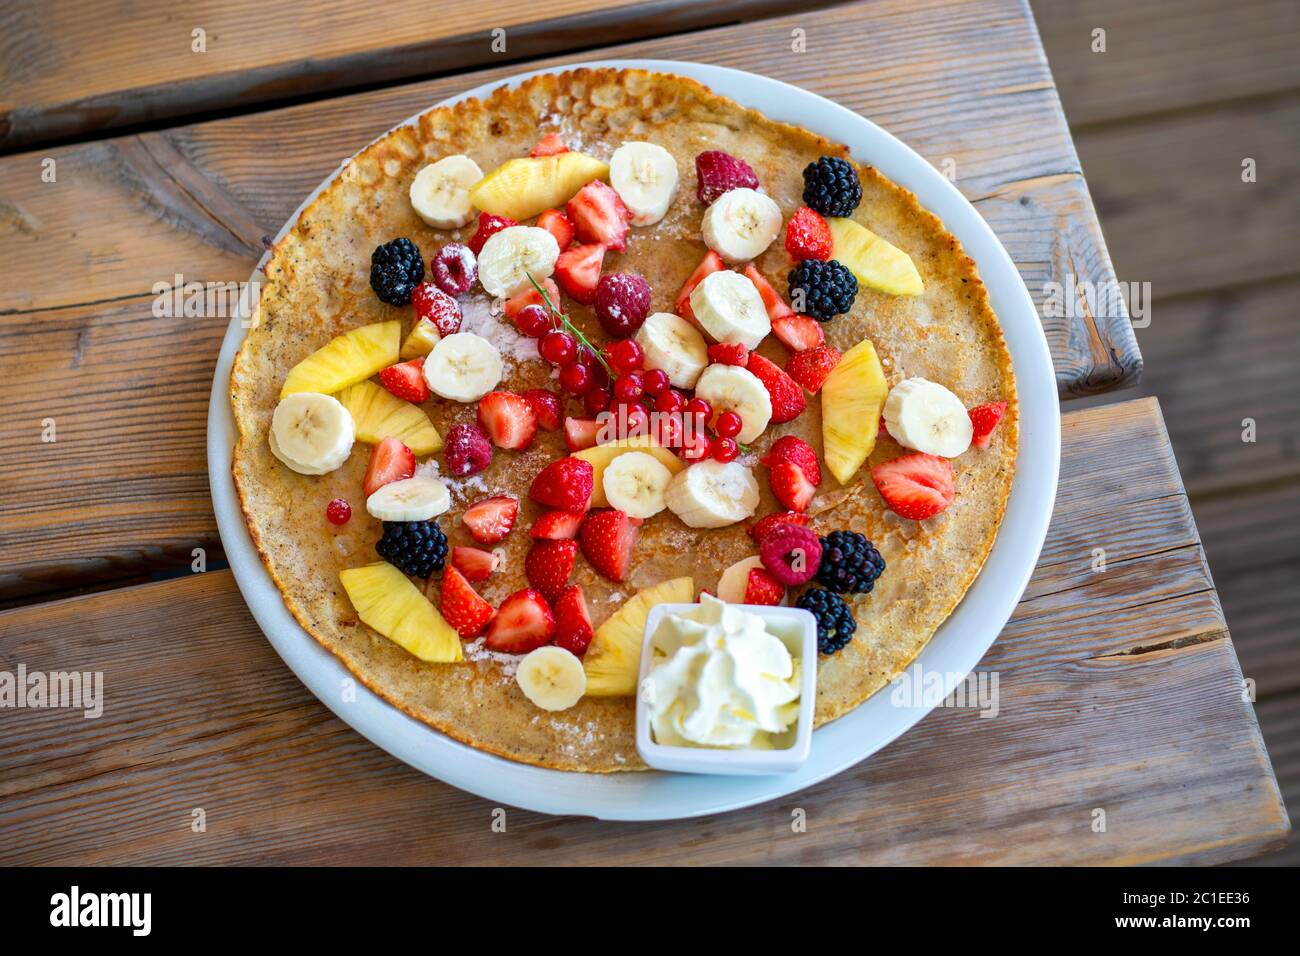 Large pancake with summer fruit and whipped cream on a wooden table. Top view. Stock Photo